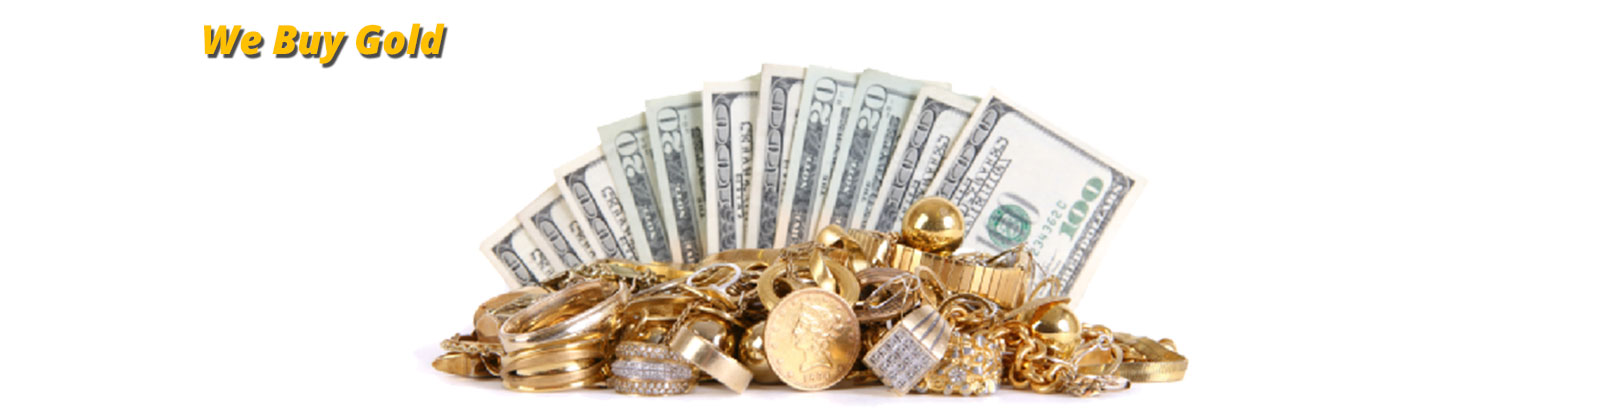 pile of gold with cash